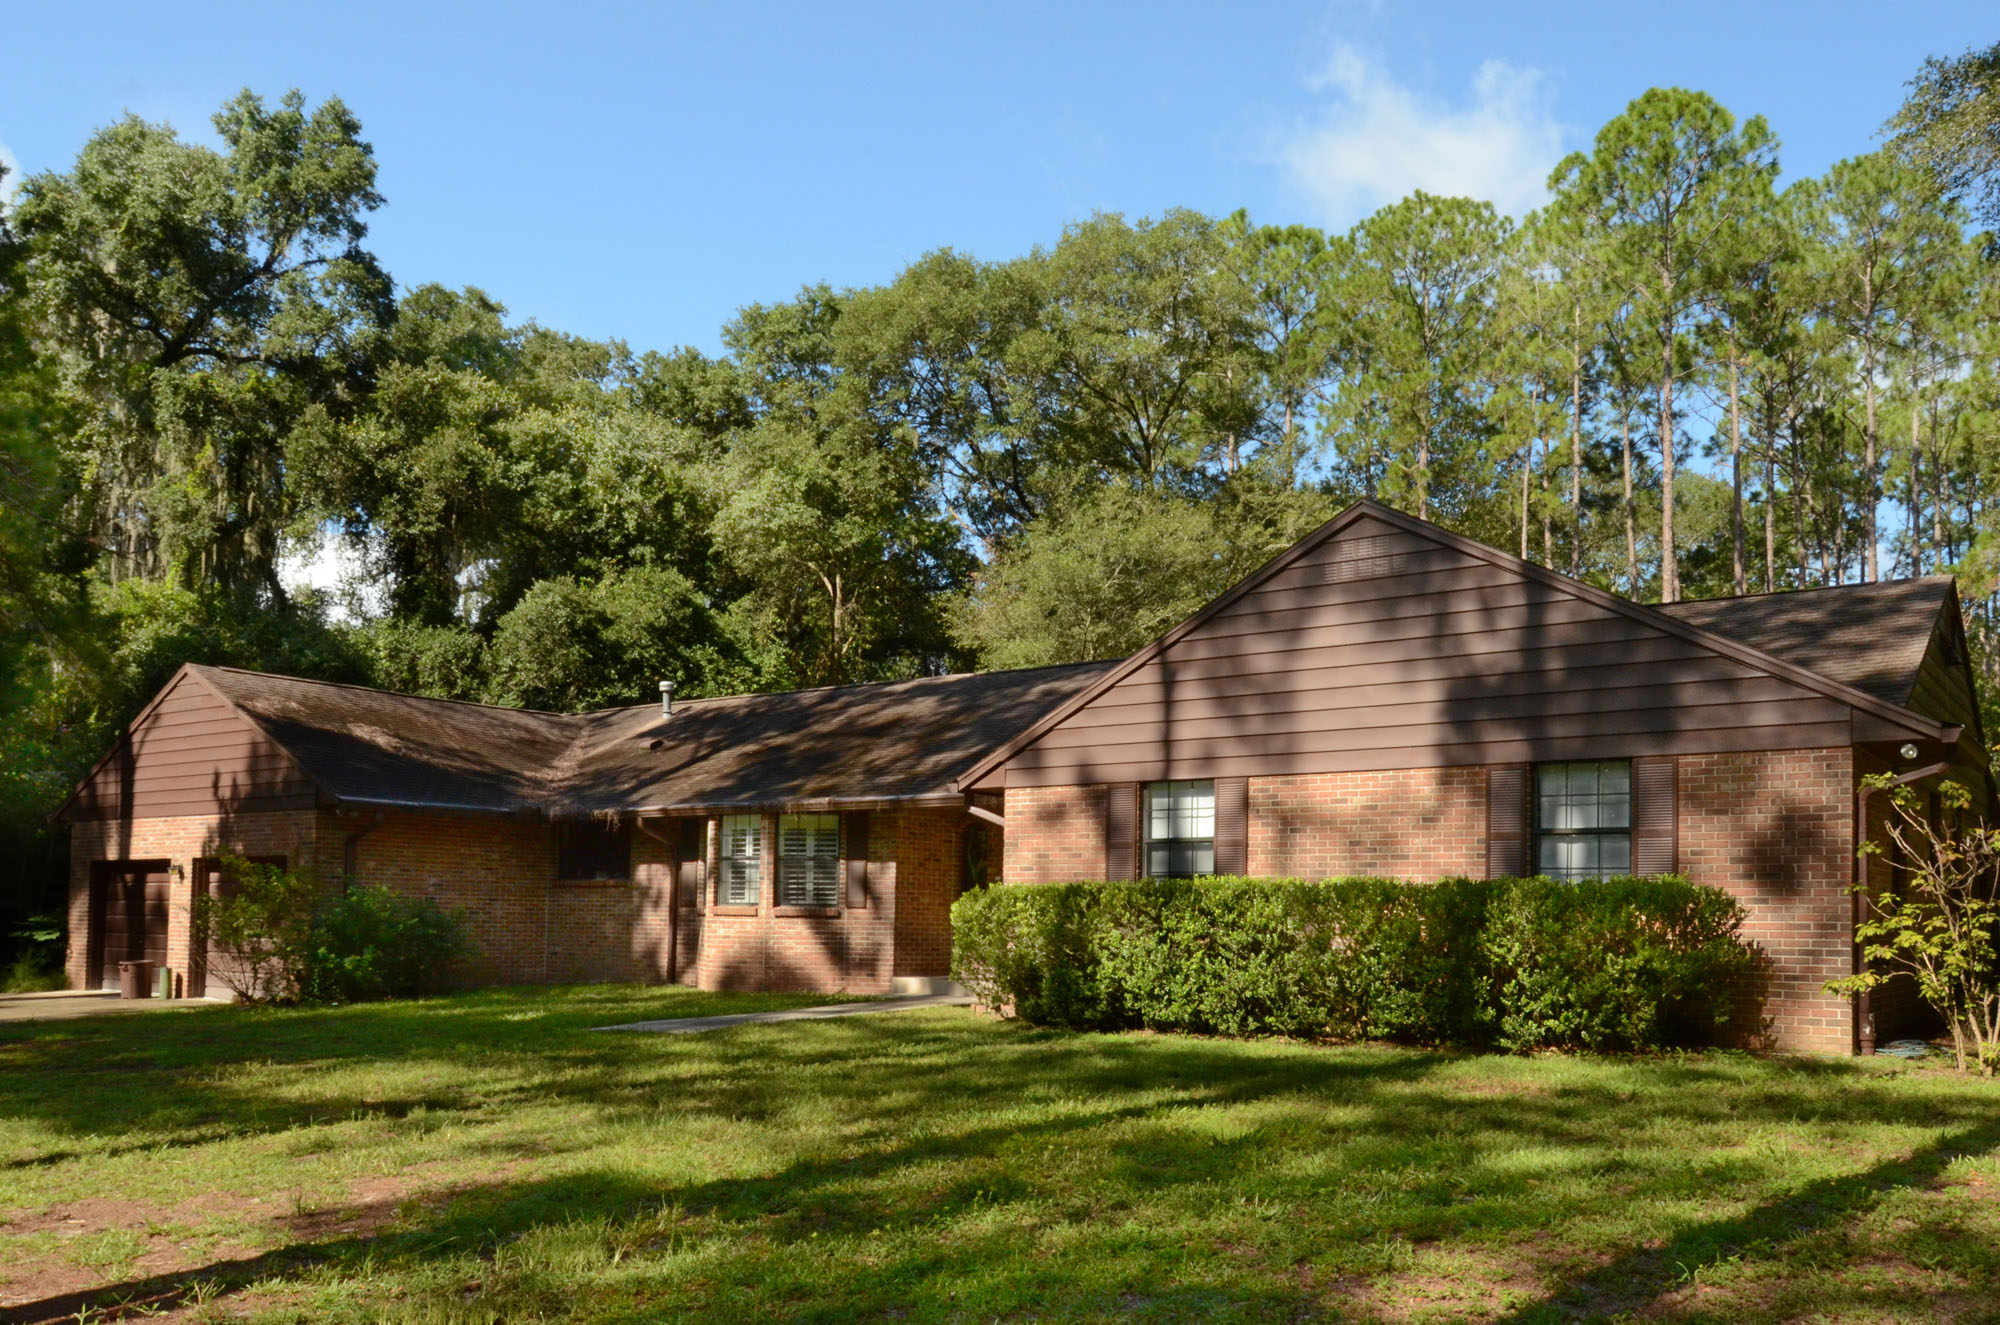 Sold: Beautiful Brick Home in NW Gainesville